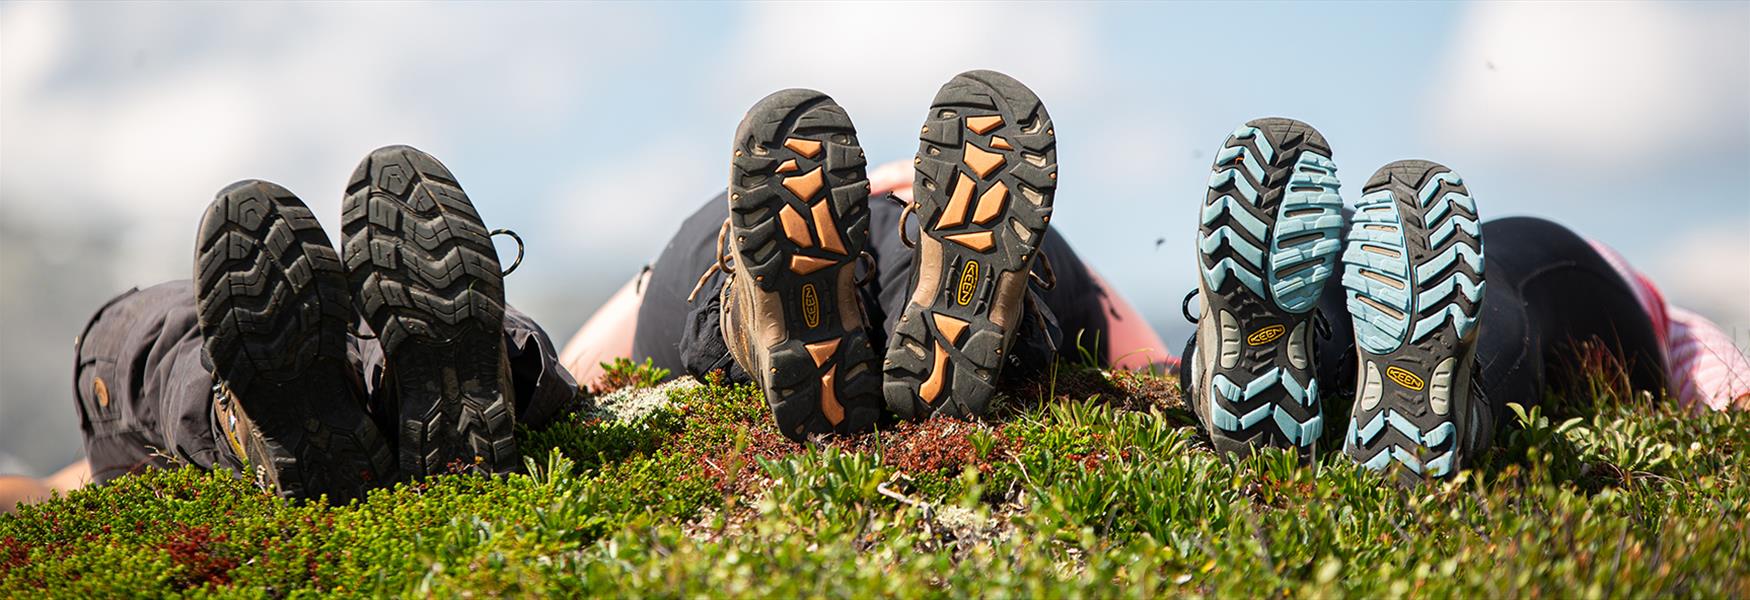 3 hikers lie on the ground and show their shoe soles